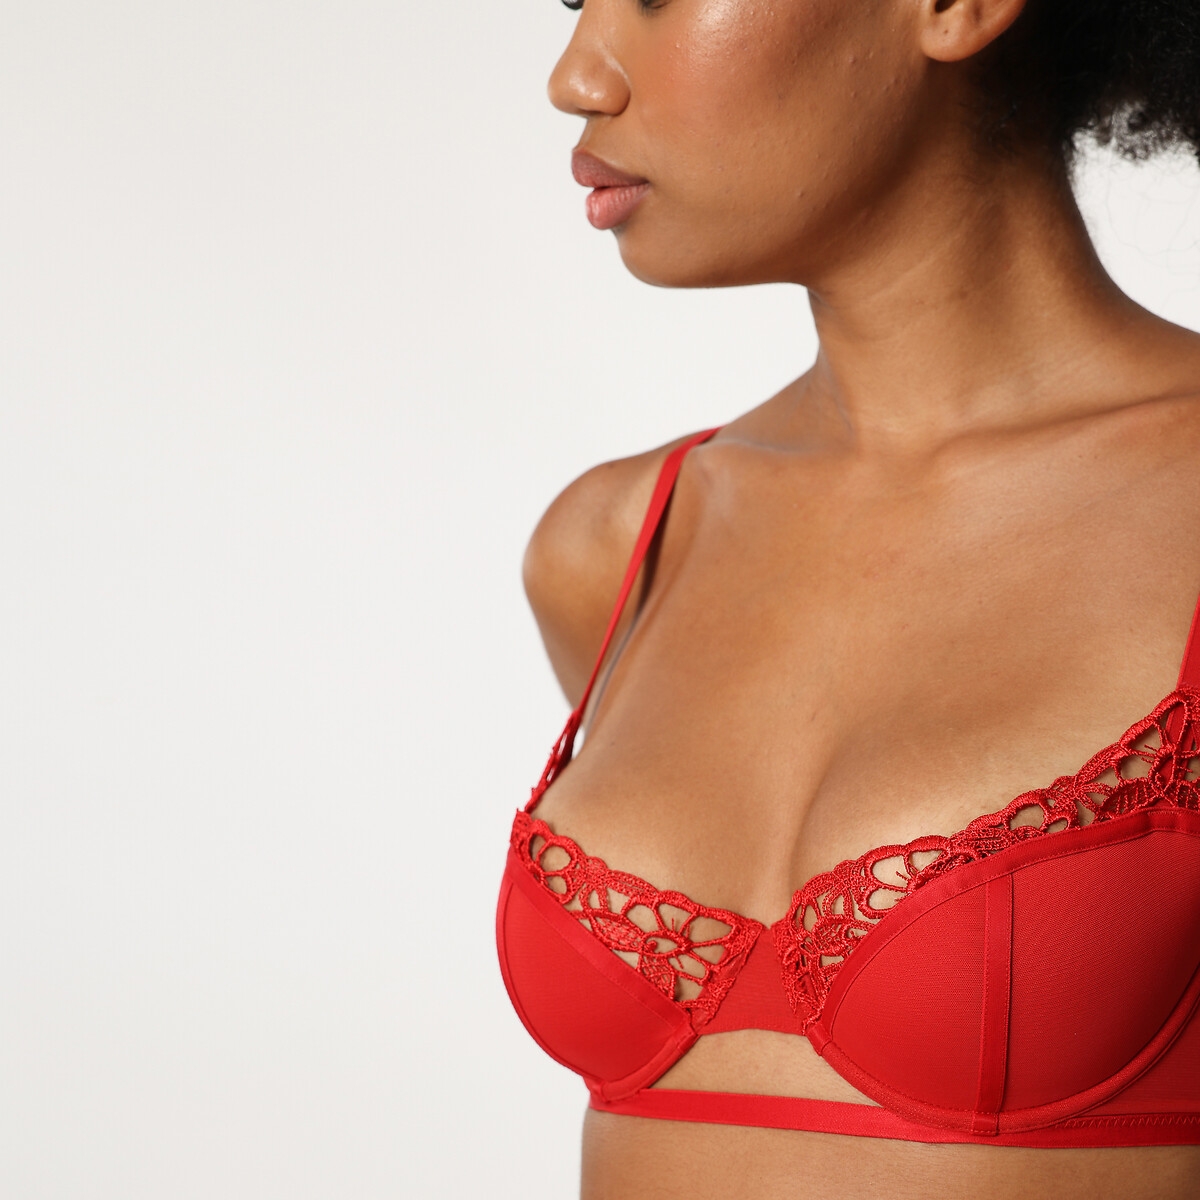 Sublime Demi-Cup Bra in Recycled, Eco-Friendly Fabrics